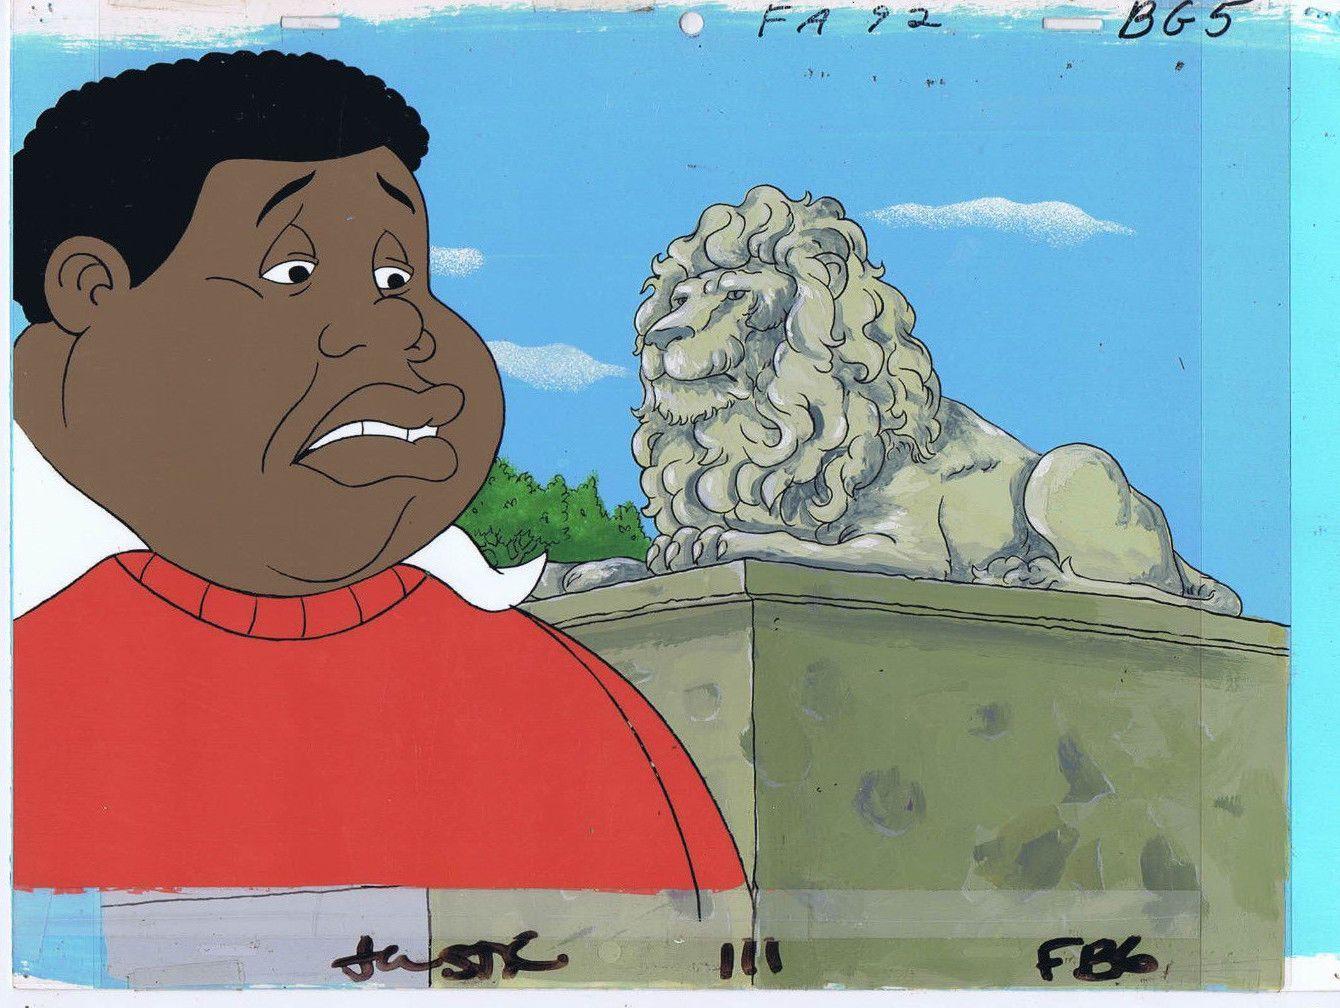 Fat Albert & The Cosby Kids Original Production Cel & Painted Bkgd